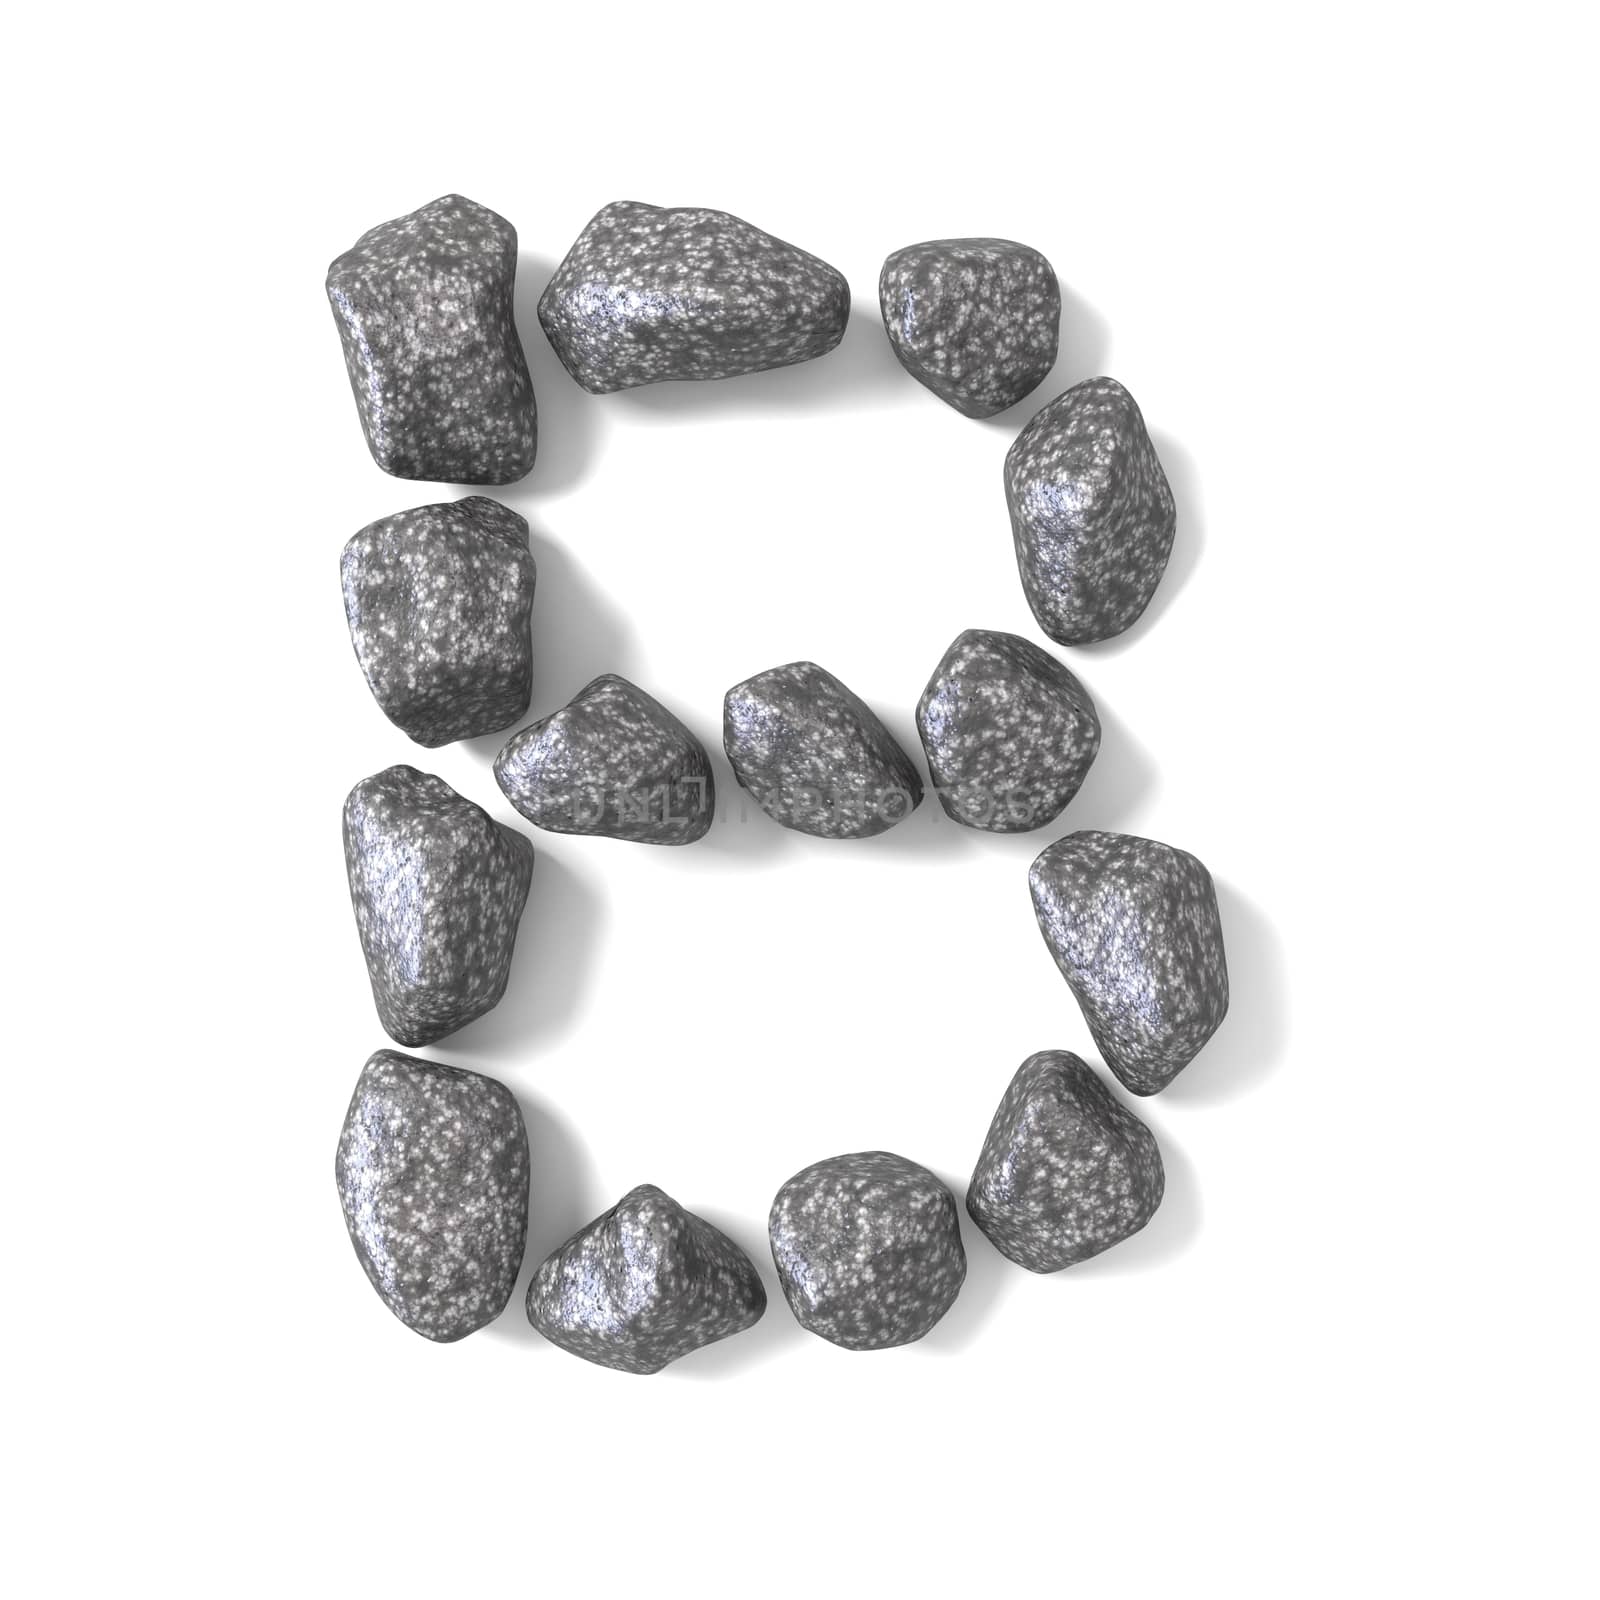 Font made of rocks LETTER B 3D by djmilic